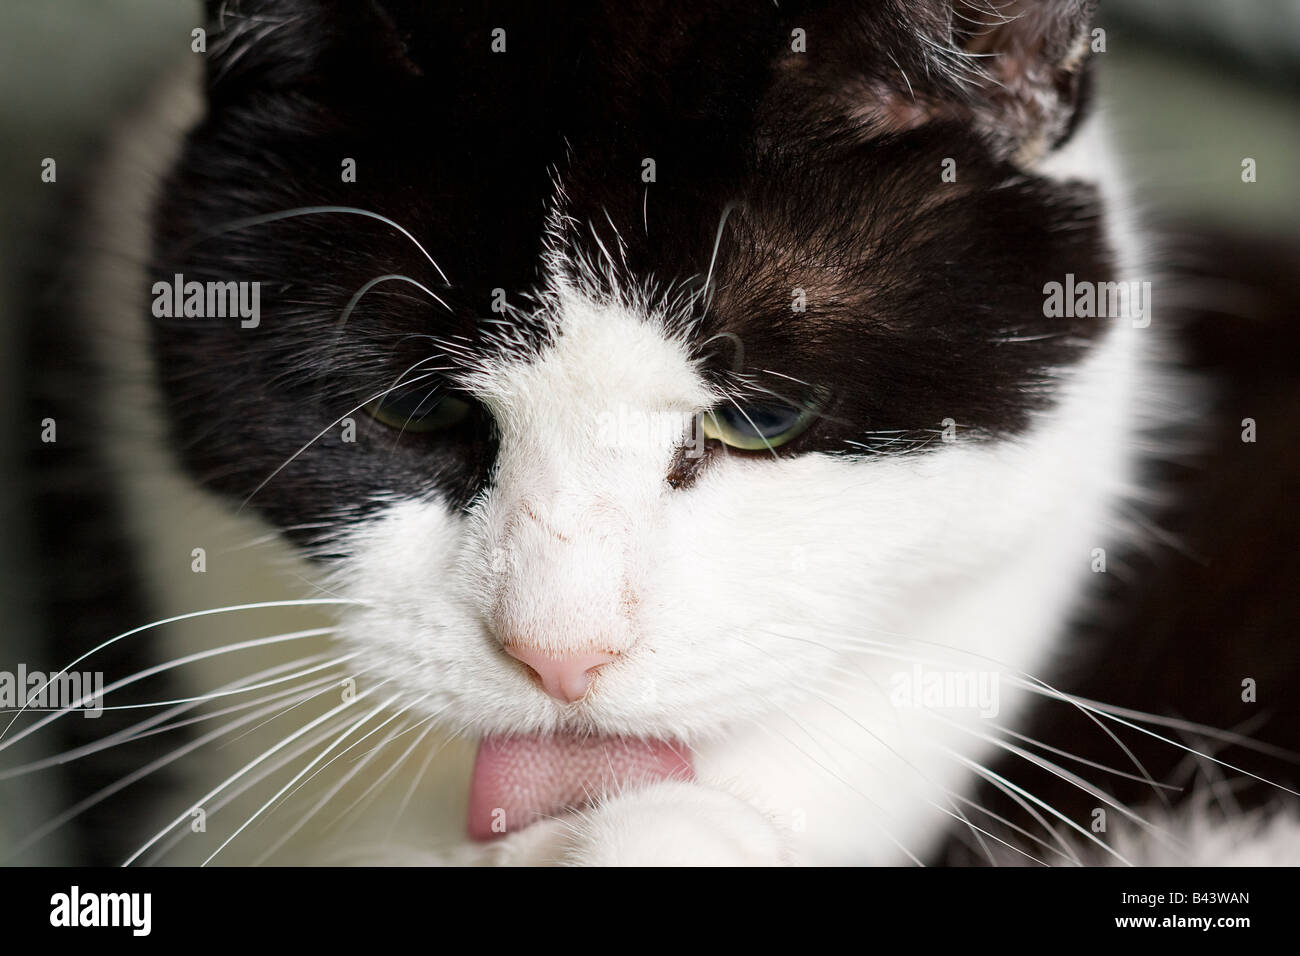 Black and white domestic cat (Felis catus) licking paw with filiform papillae in view Stock Photo